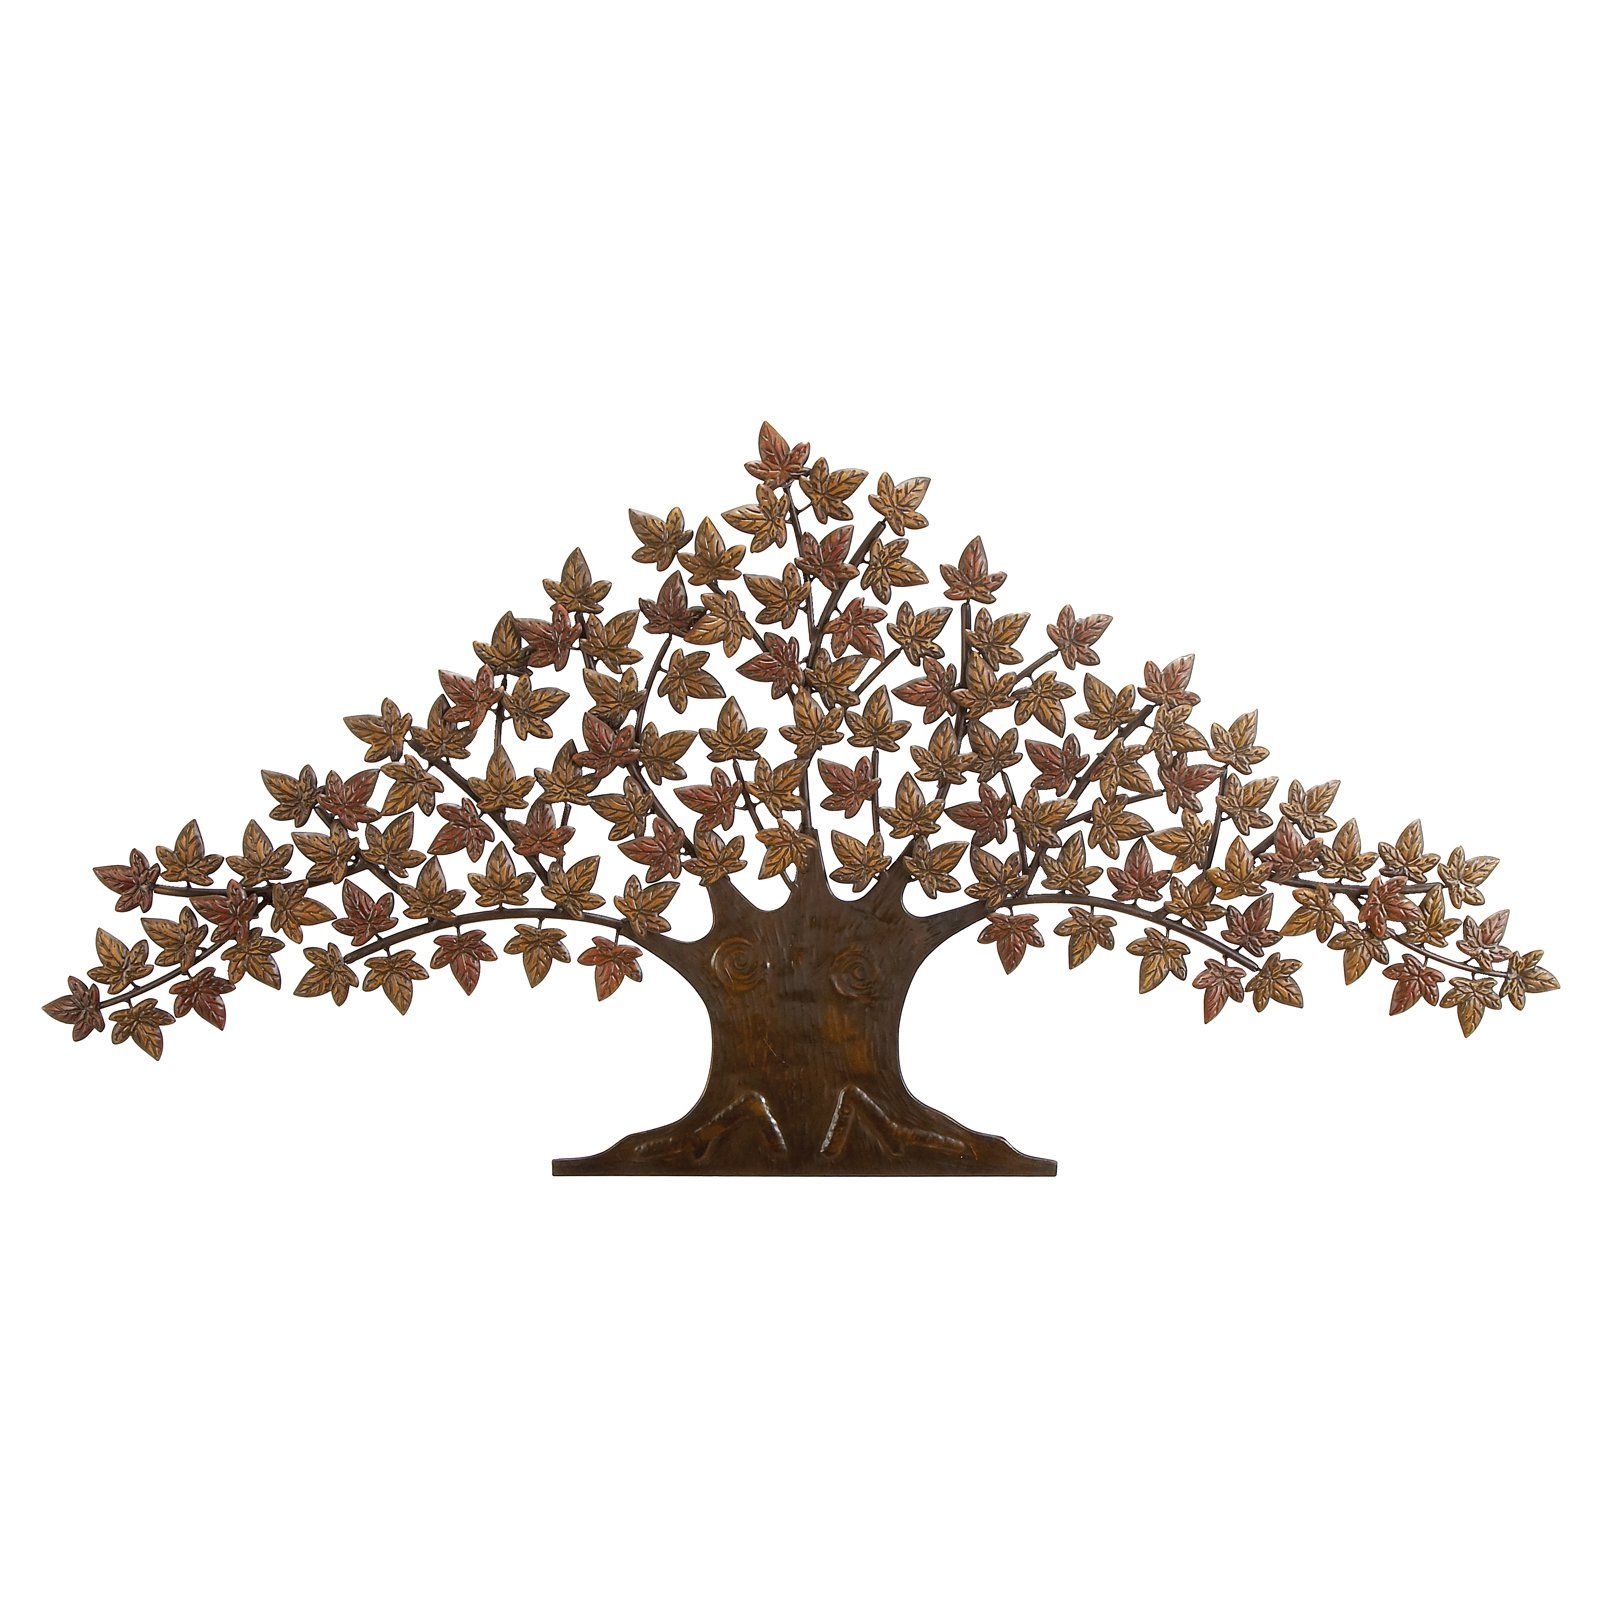 Wetherden Tree Wall Decor Intended For 2020 Decmode Maple Tree Wall Sculpture (View 5 of 20)